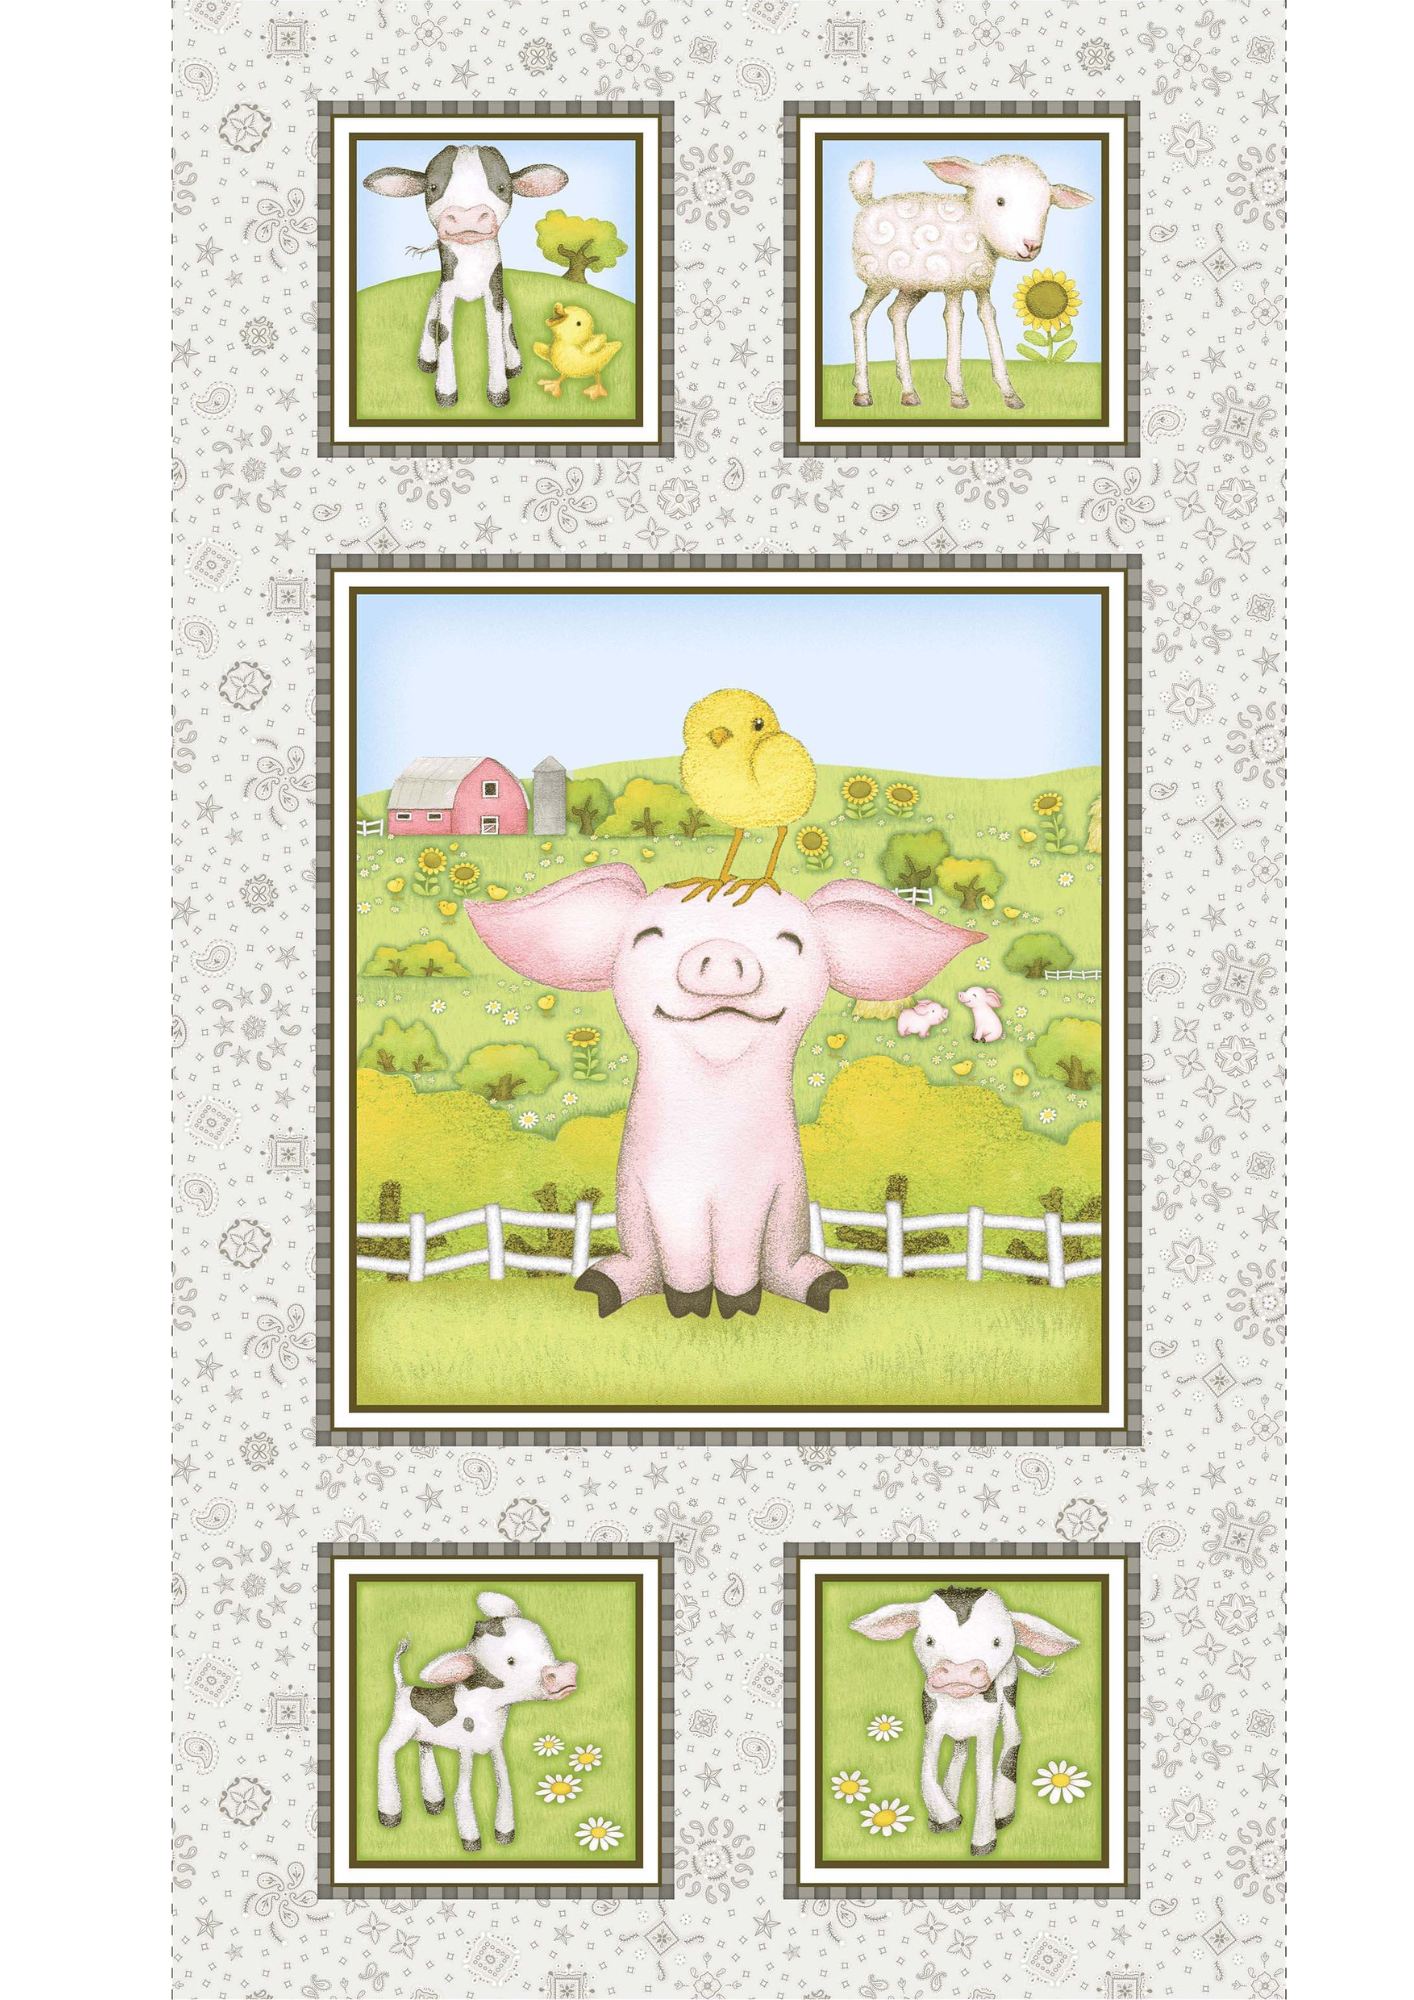 Elizabeth's Studio Fabric Panel Farm Babies Panel Only from Henry Glass